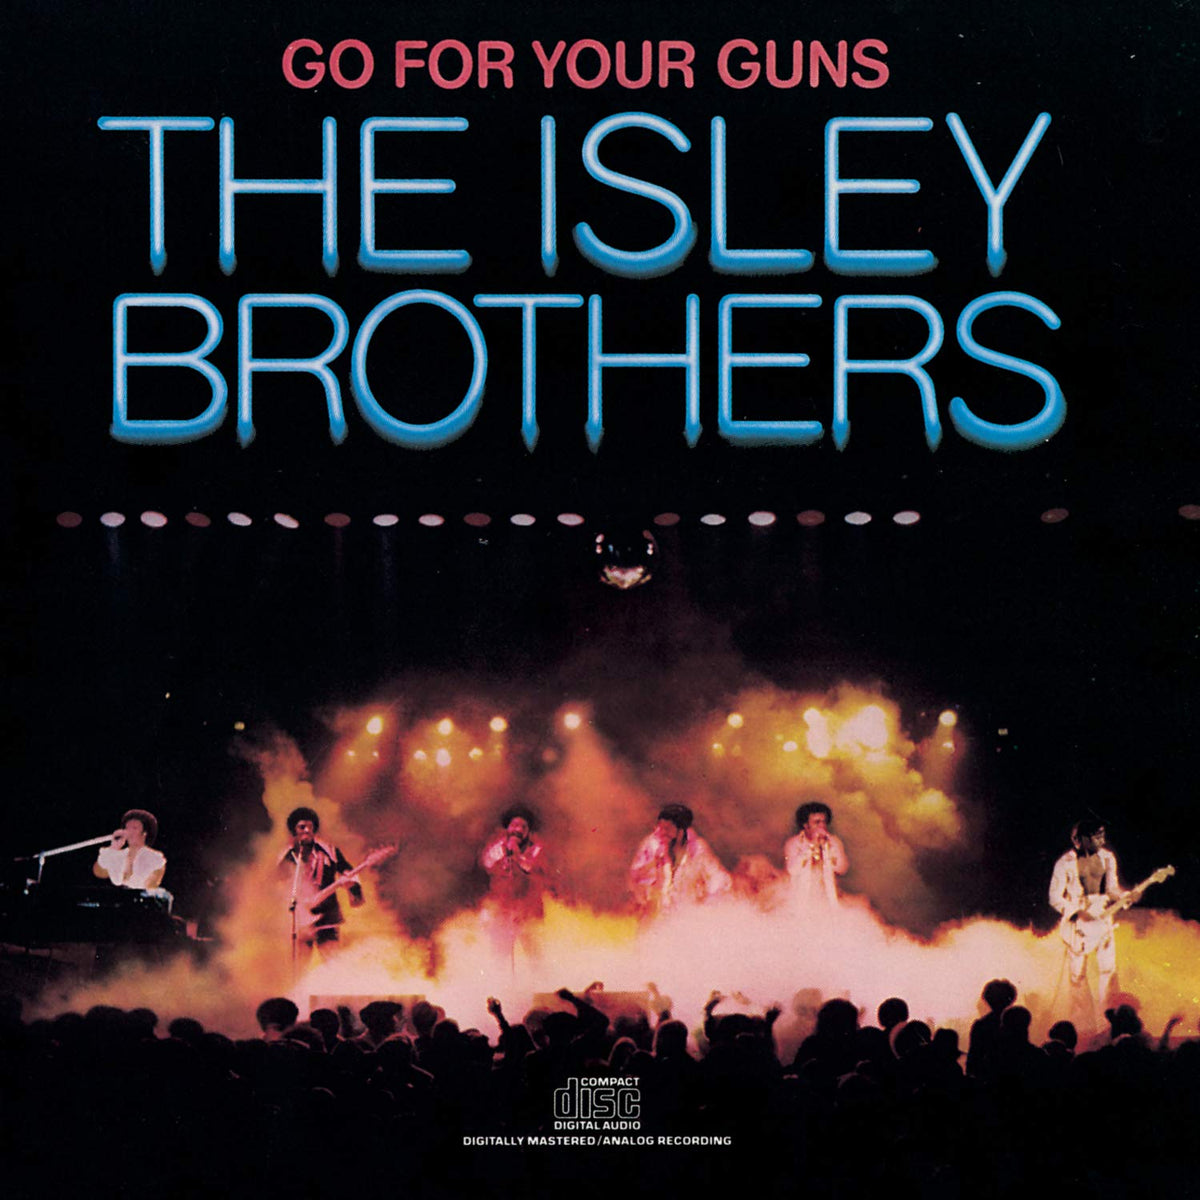 The Isley Brothers – Go For Your Guns LP (Music On Vinyl, 180g, Audiophile, Red Vinyl, Gatefold)